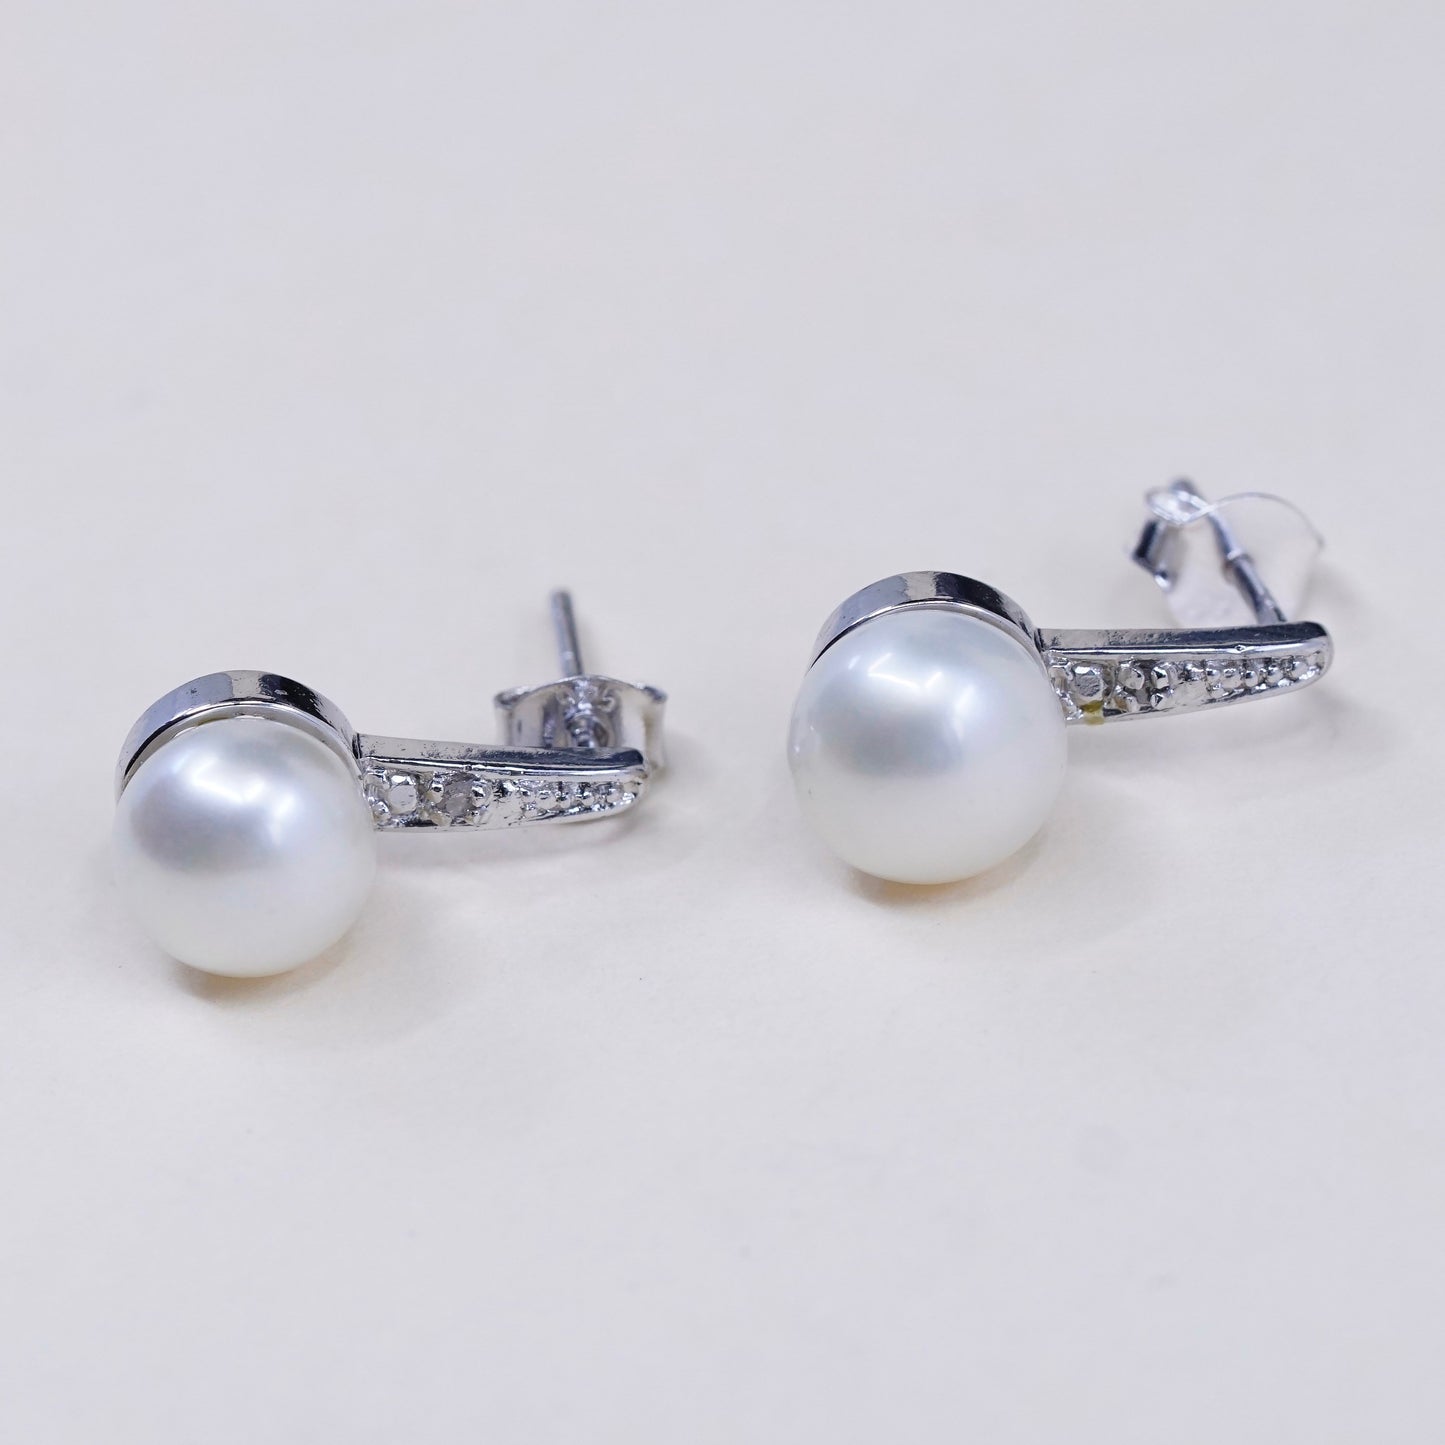 Vintage DBJ sterling silver earrings, 925 studs with pearl and crystal